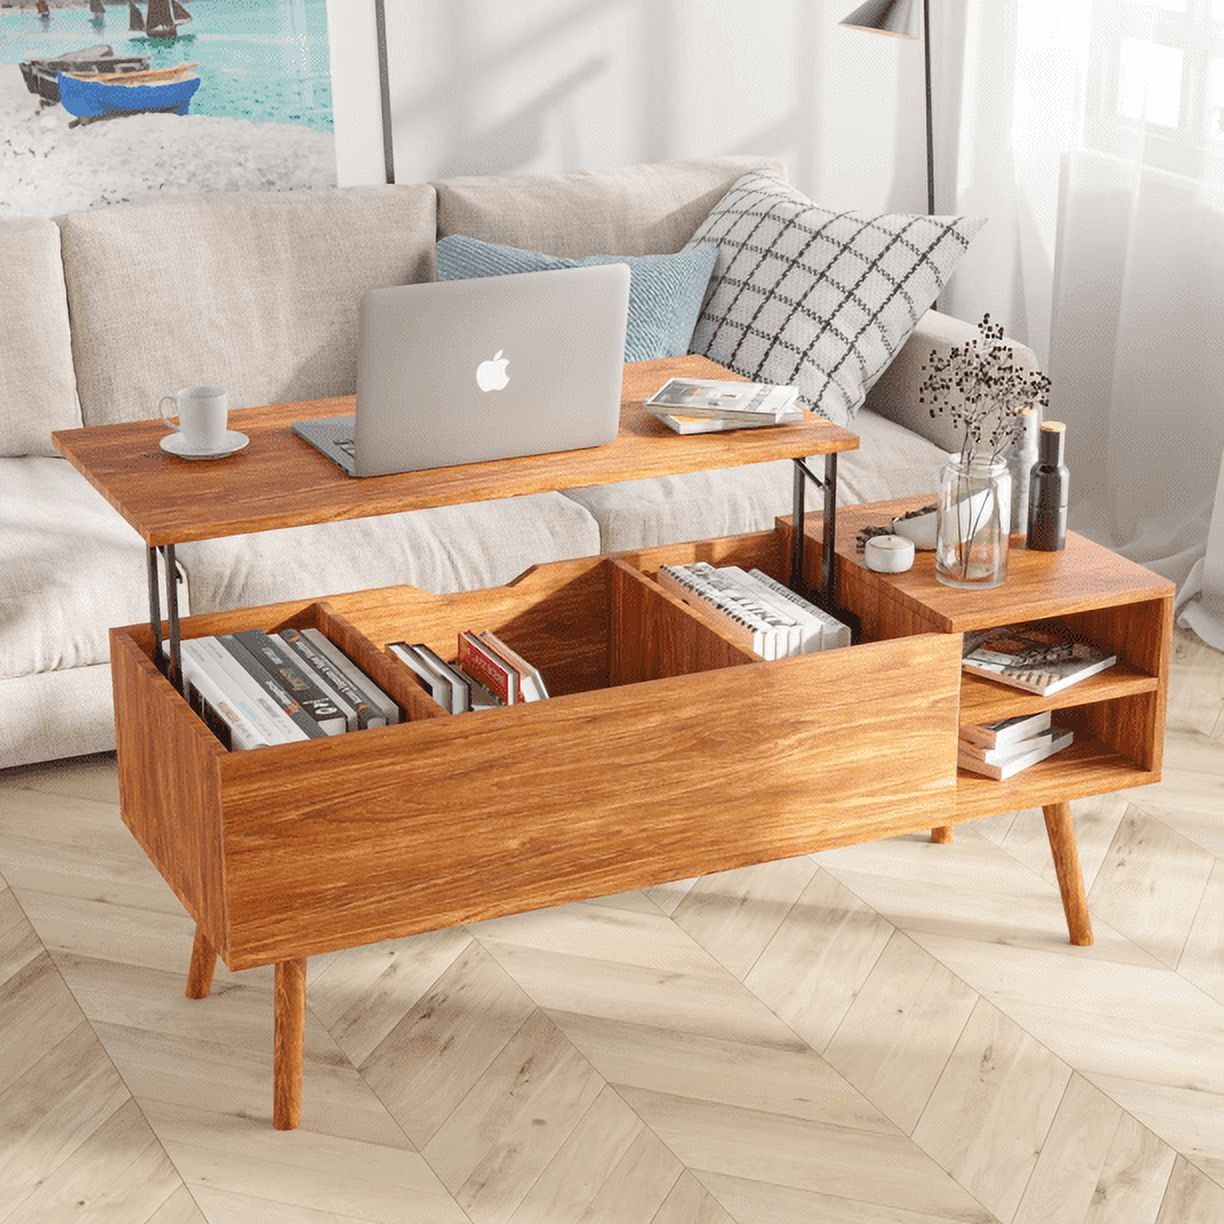 Modern Lift Top Coffee Table With Hidden Compartment Storage,adjustable  Wood Table For Living Room,brown – Walmart Intended For Modern Coffee Tables With Hidden Storage Compartments (Photo 1 of 15)